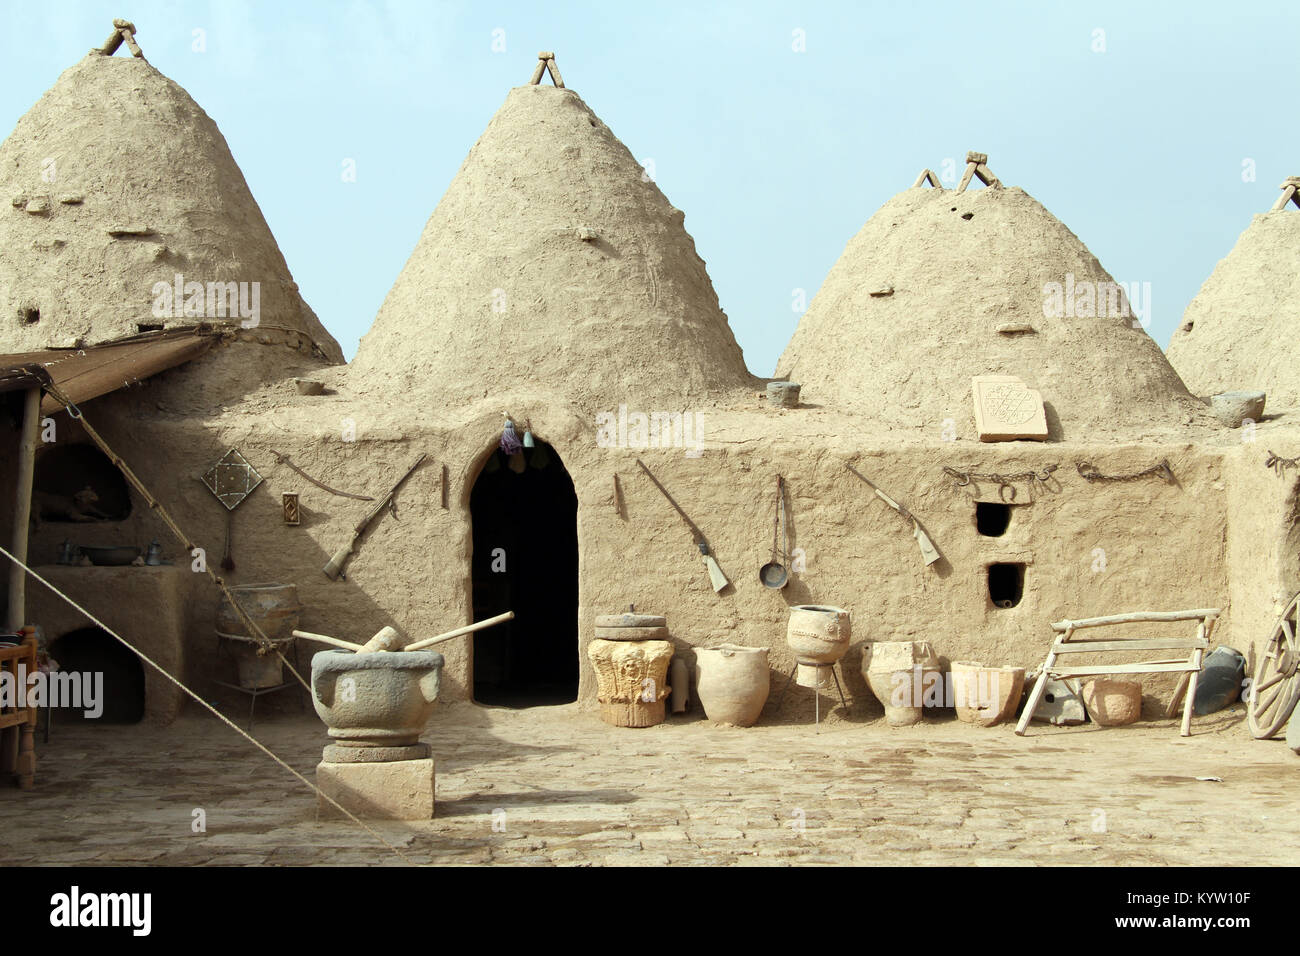 Human dwellings in early mesopotamia were made of